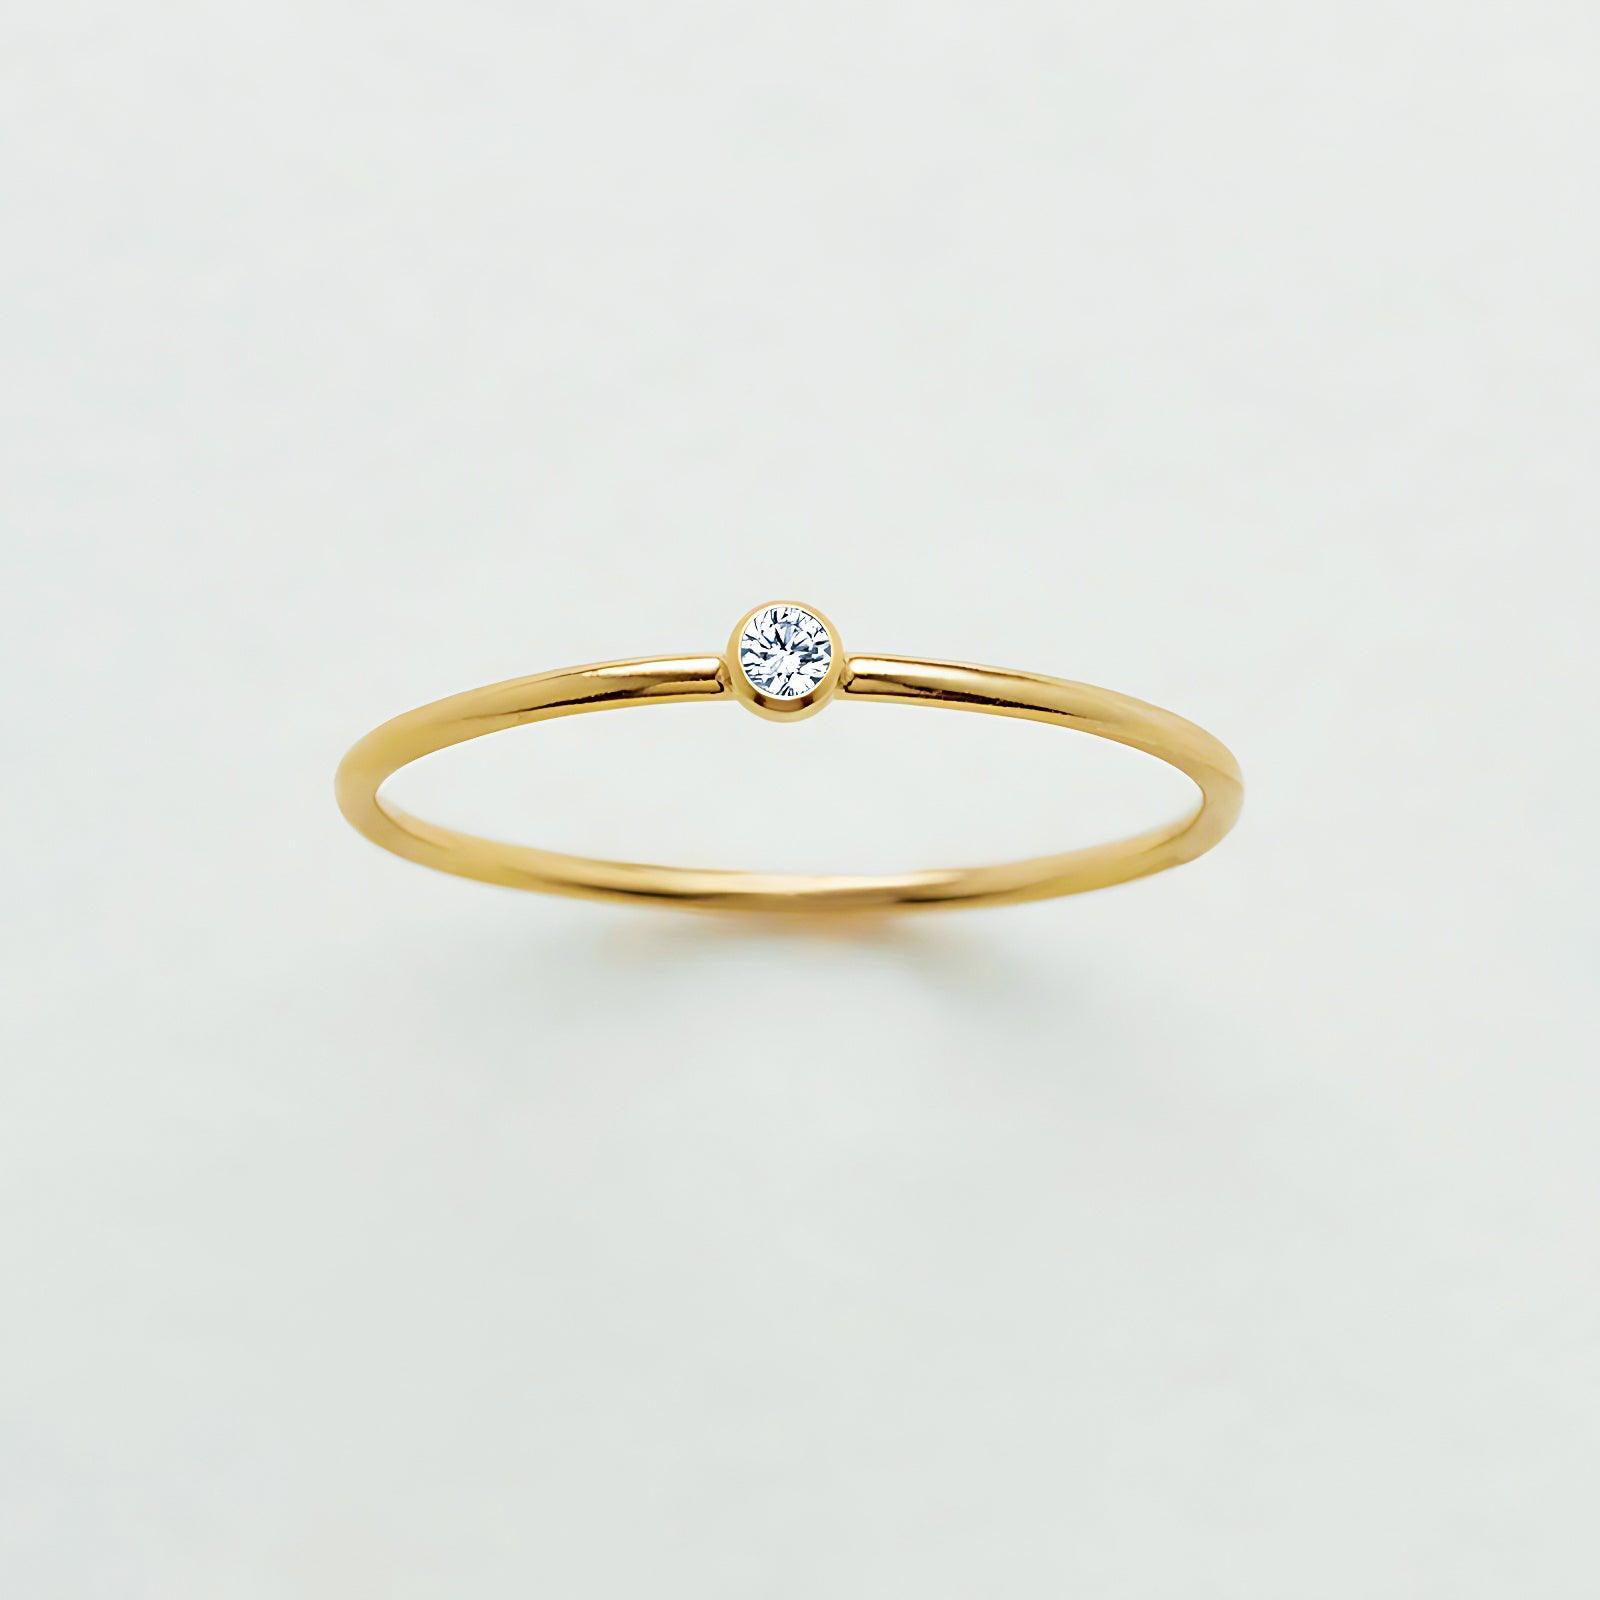 April Birthstone Cute Ring for Christmas 2023 | April Birthstone Cute Ring - undefined | April Birthstone, April birthstone is Diamond, Birthstone Ring, cute ring, S925 Silver Vintage Cute Ring, Sterling Silver s925 cute Ring | From Hunny Life | hunnylife.com